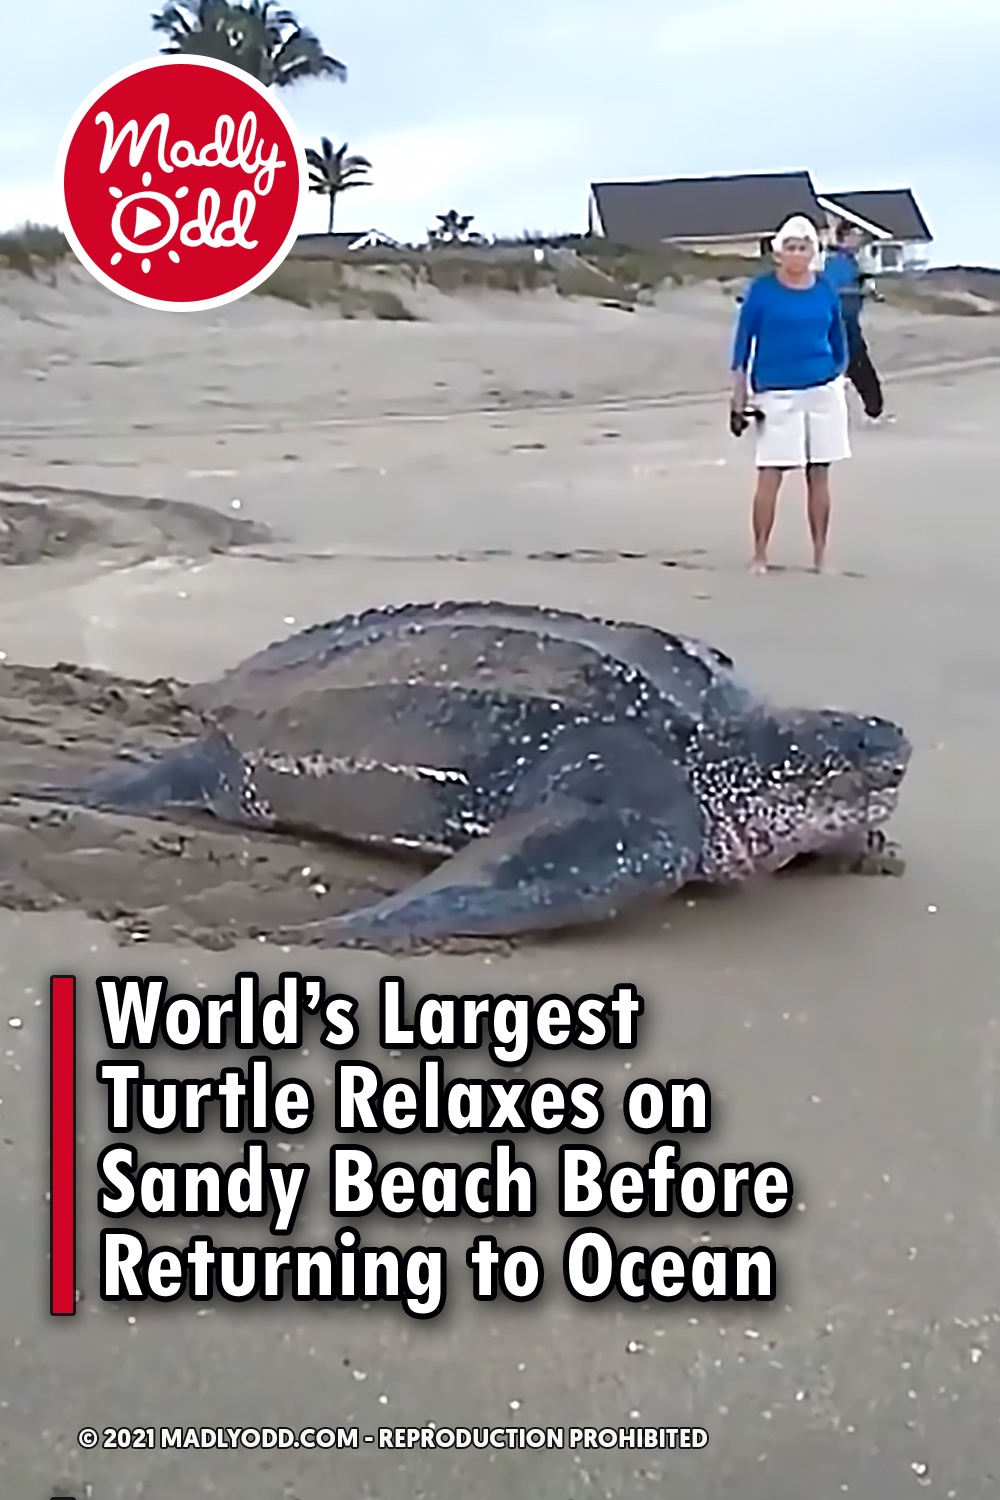 World’s Largest Turtle Relaxes on Sandy Beach Before Returning to Ocean